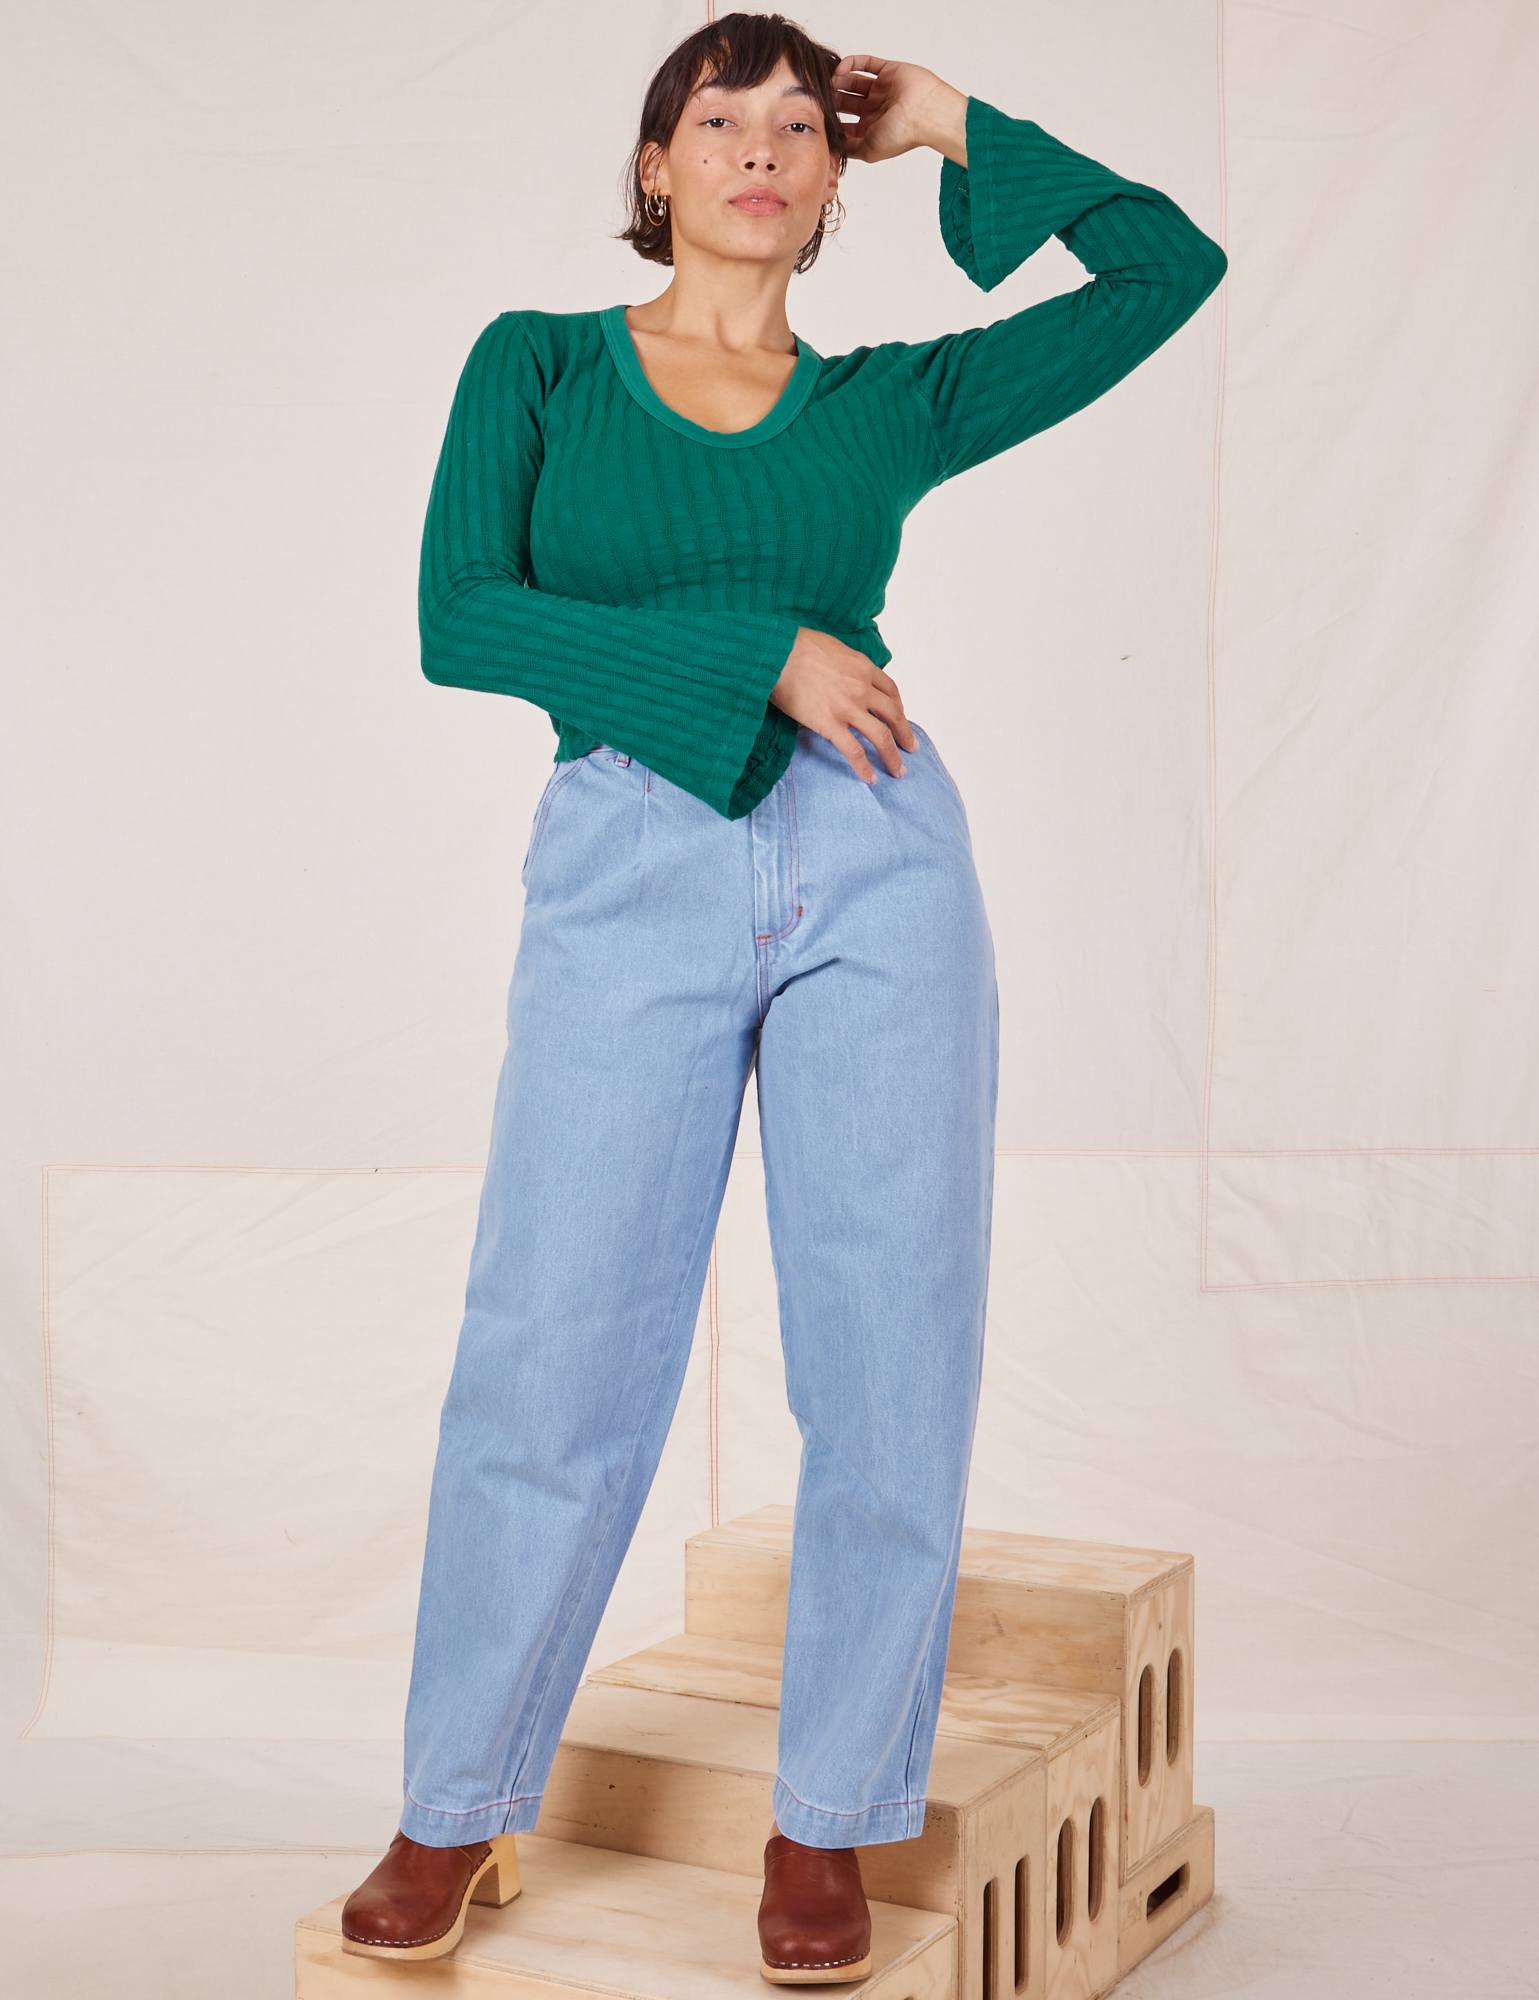 Tiara is wearing S Bell Sleeve Top in Hunter Green paired with light wash Trouser Jeans